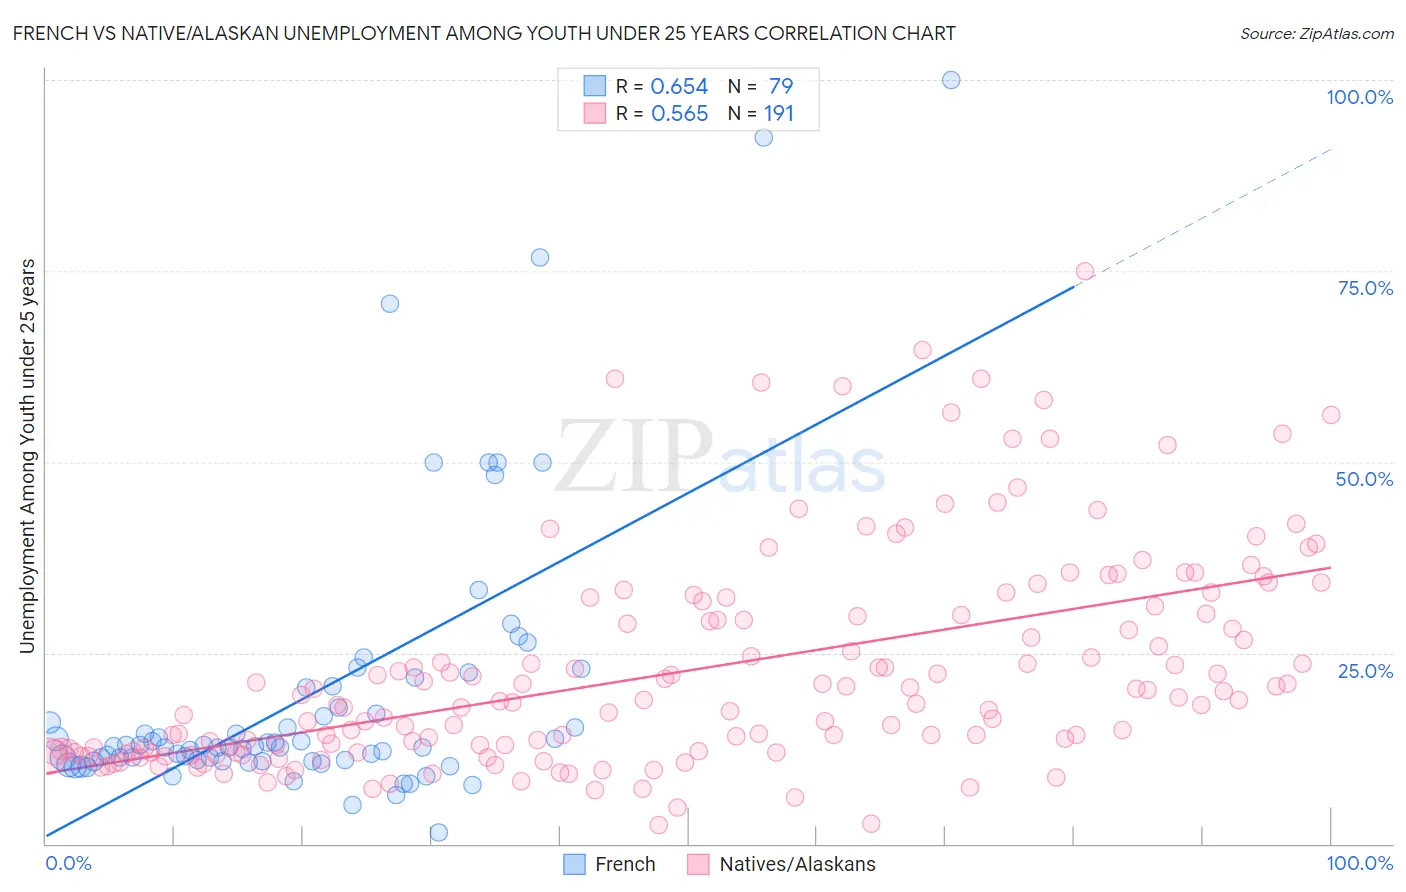 French vs Native/Alaskan Unemployment Among Youth under 25 years